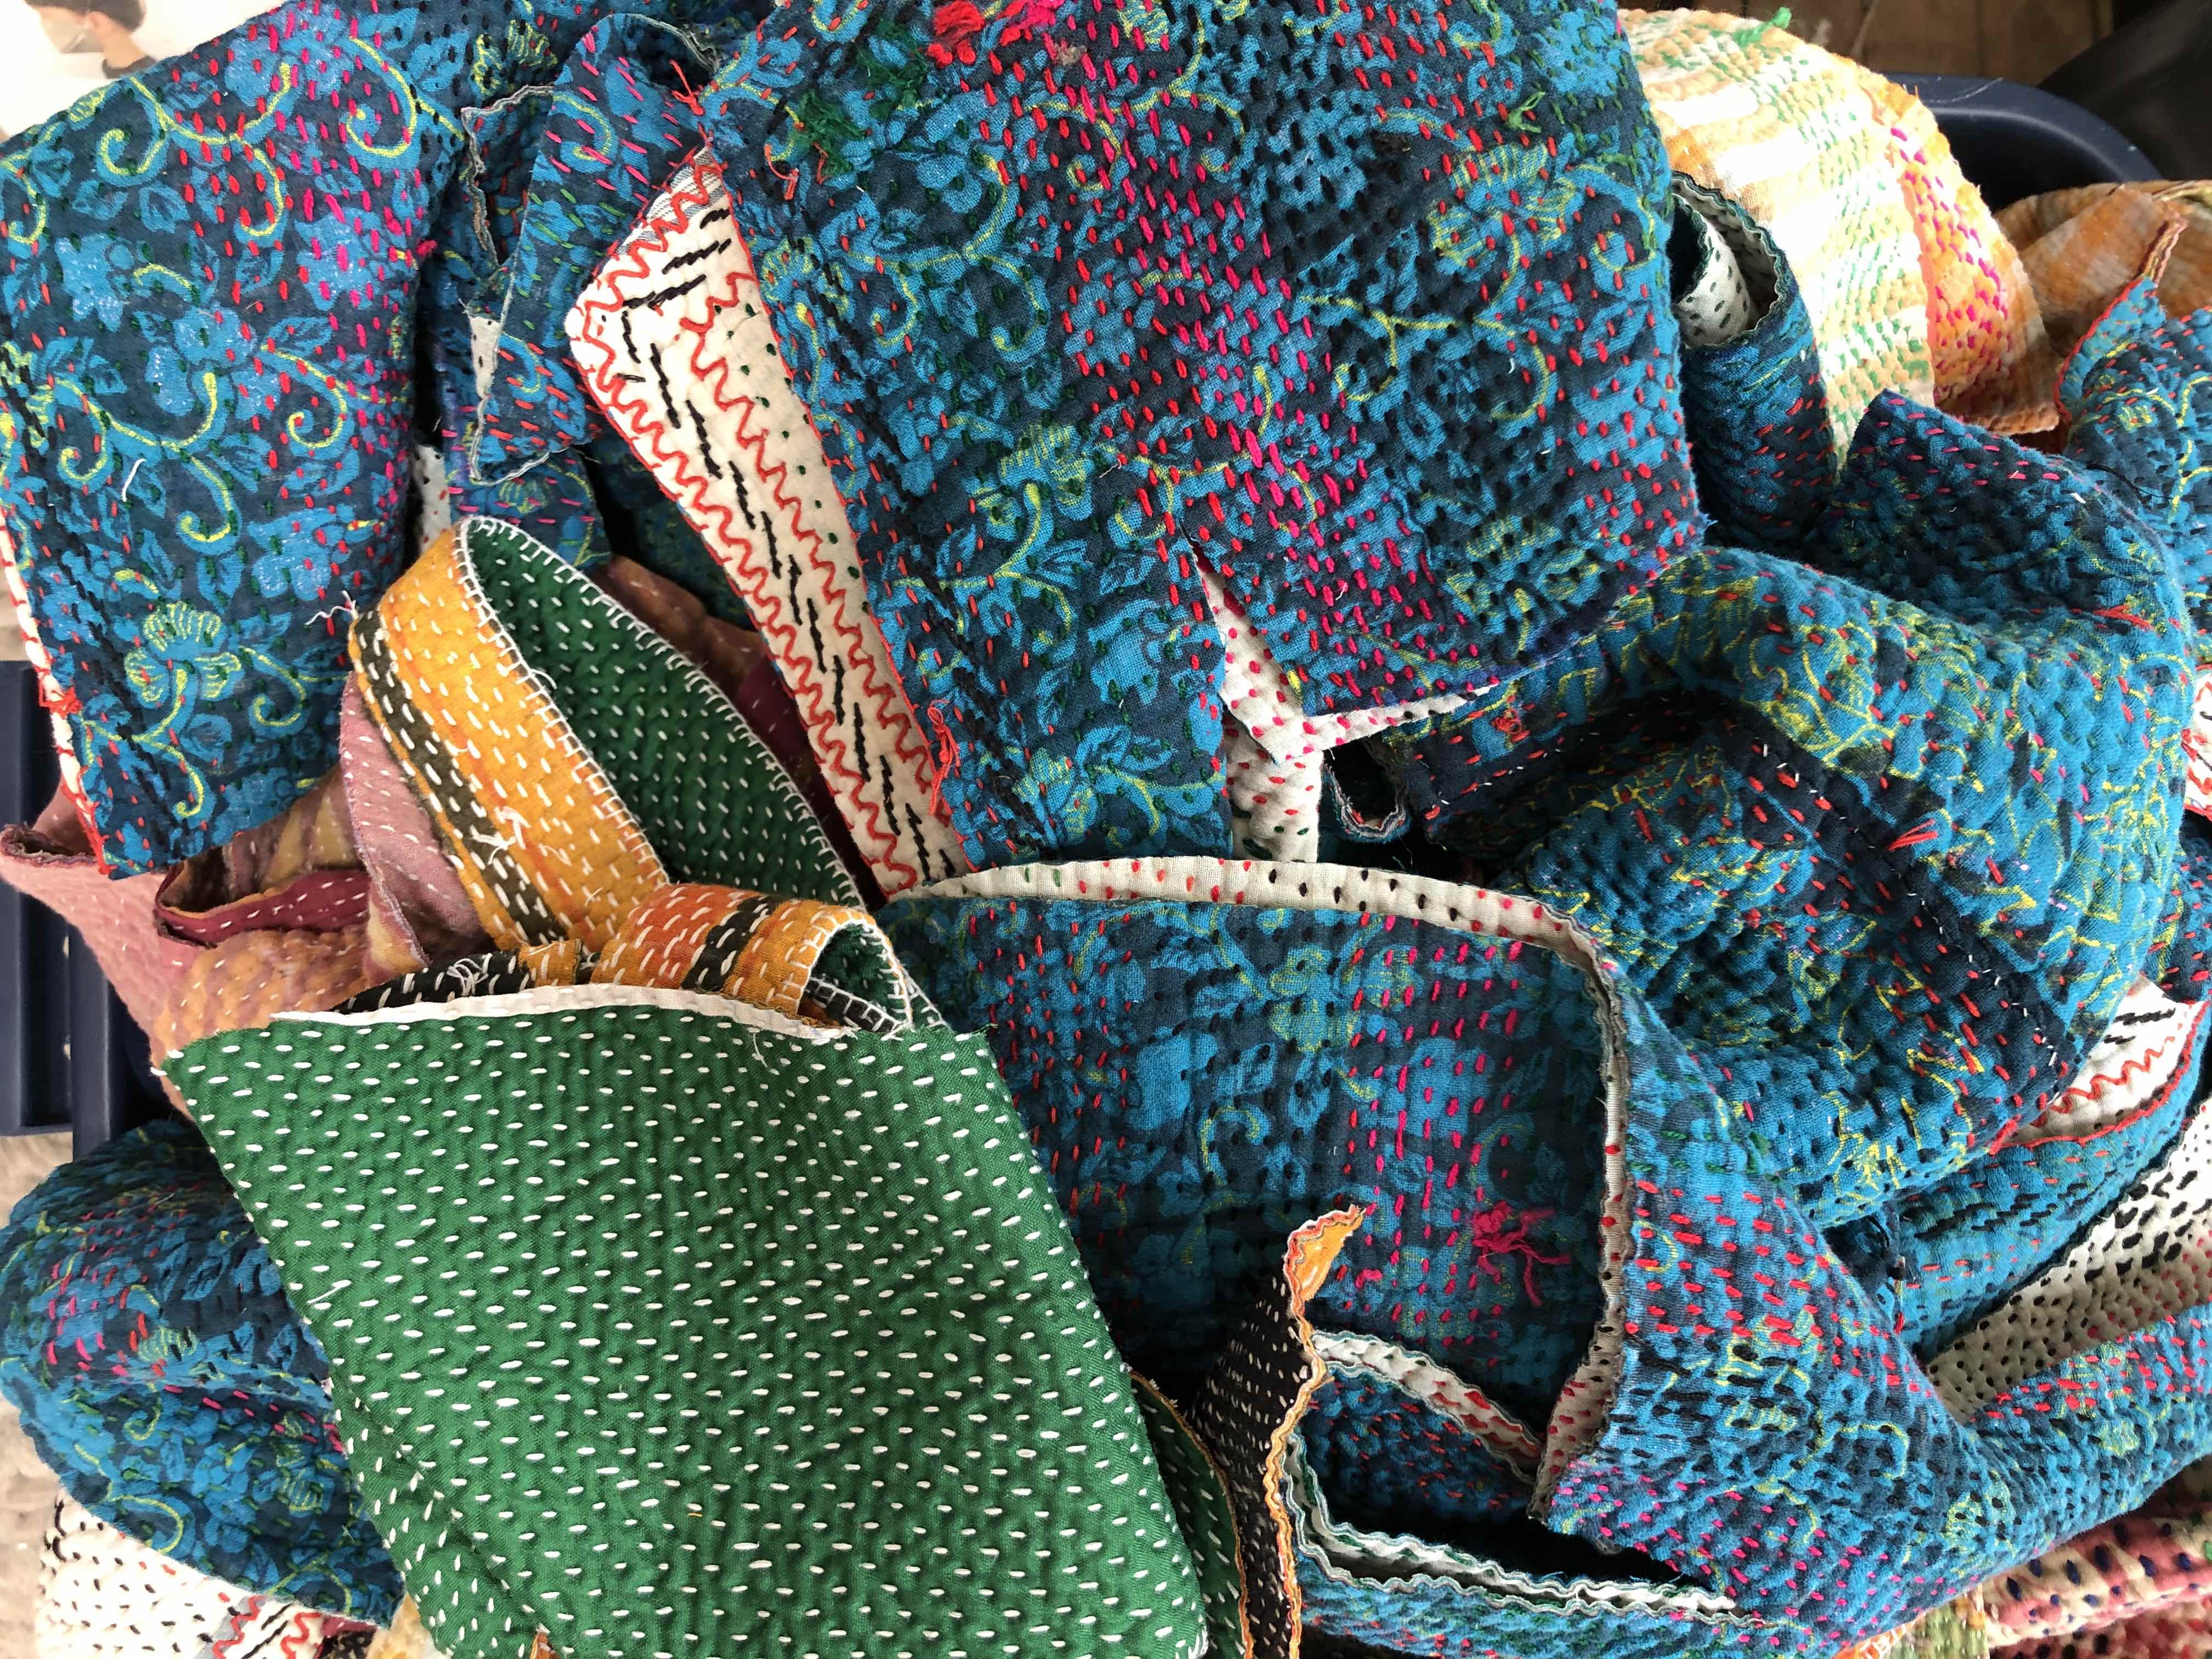 Multicolored and patterned mixed textiles with stitching